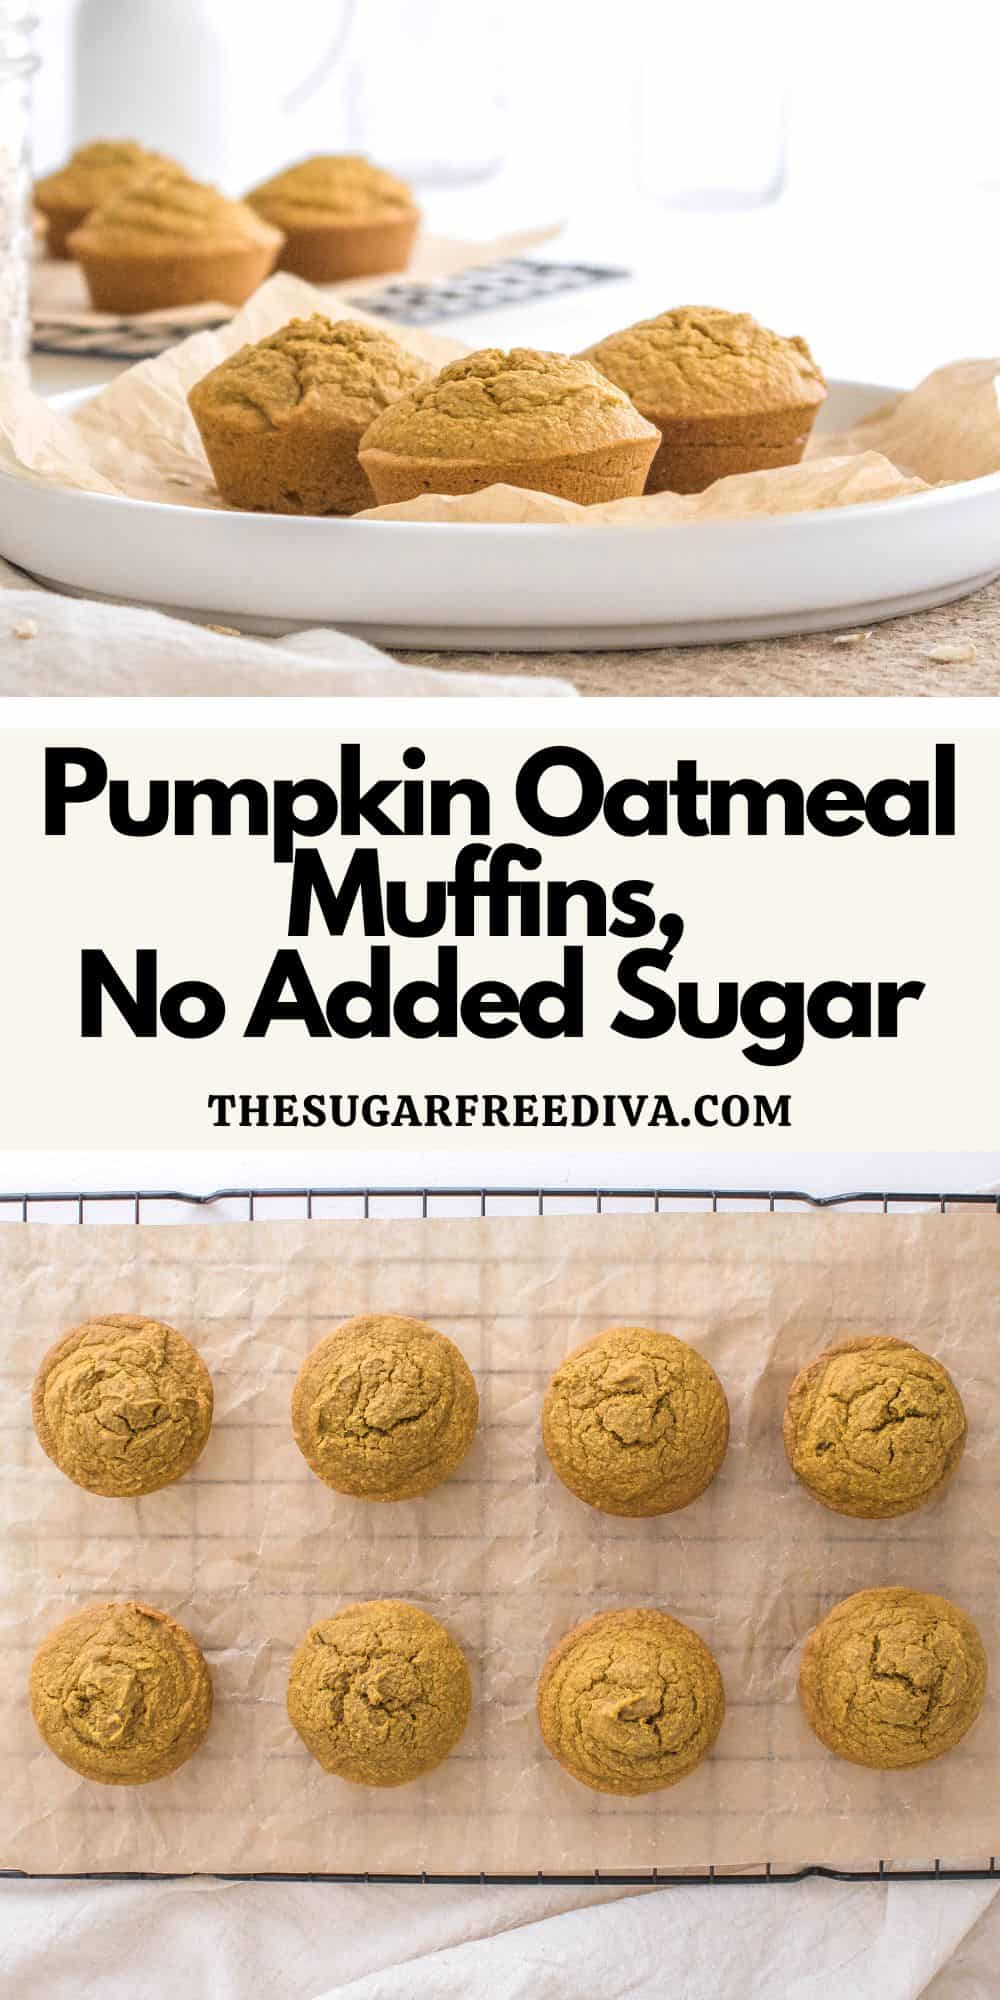 "pumpkin oatmeal muffins no sugar added, a delicious, healthy and gluten free recipe made with no added sugar.